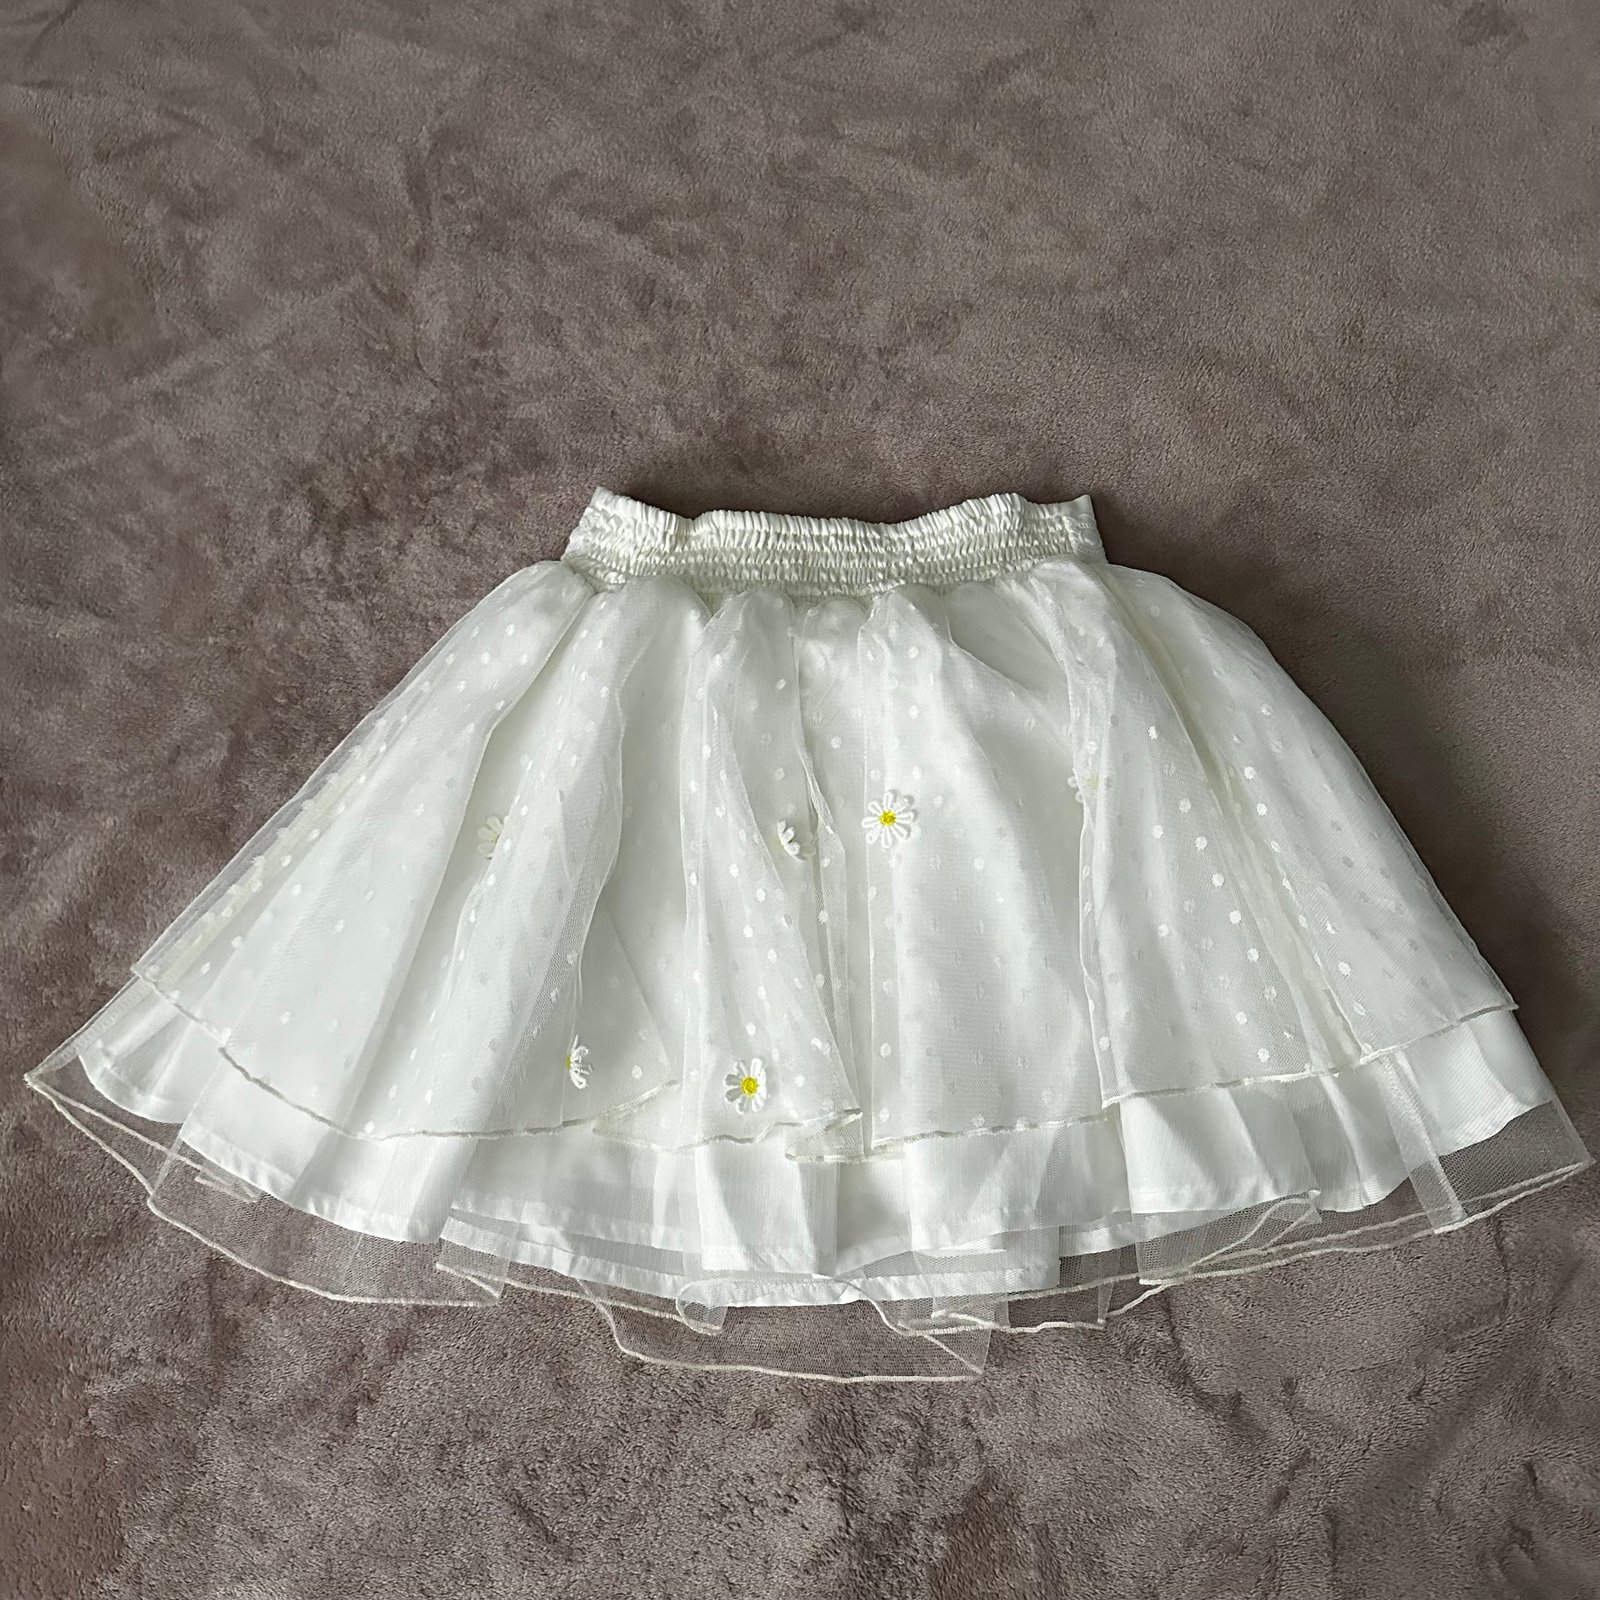 Authentic Liz Lisa White Daisy Tulle Skirt hmFzKgBo4 just for you